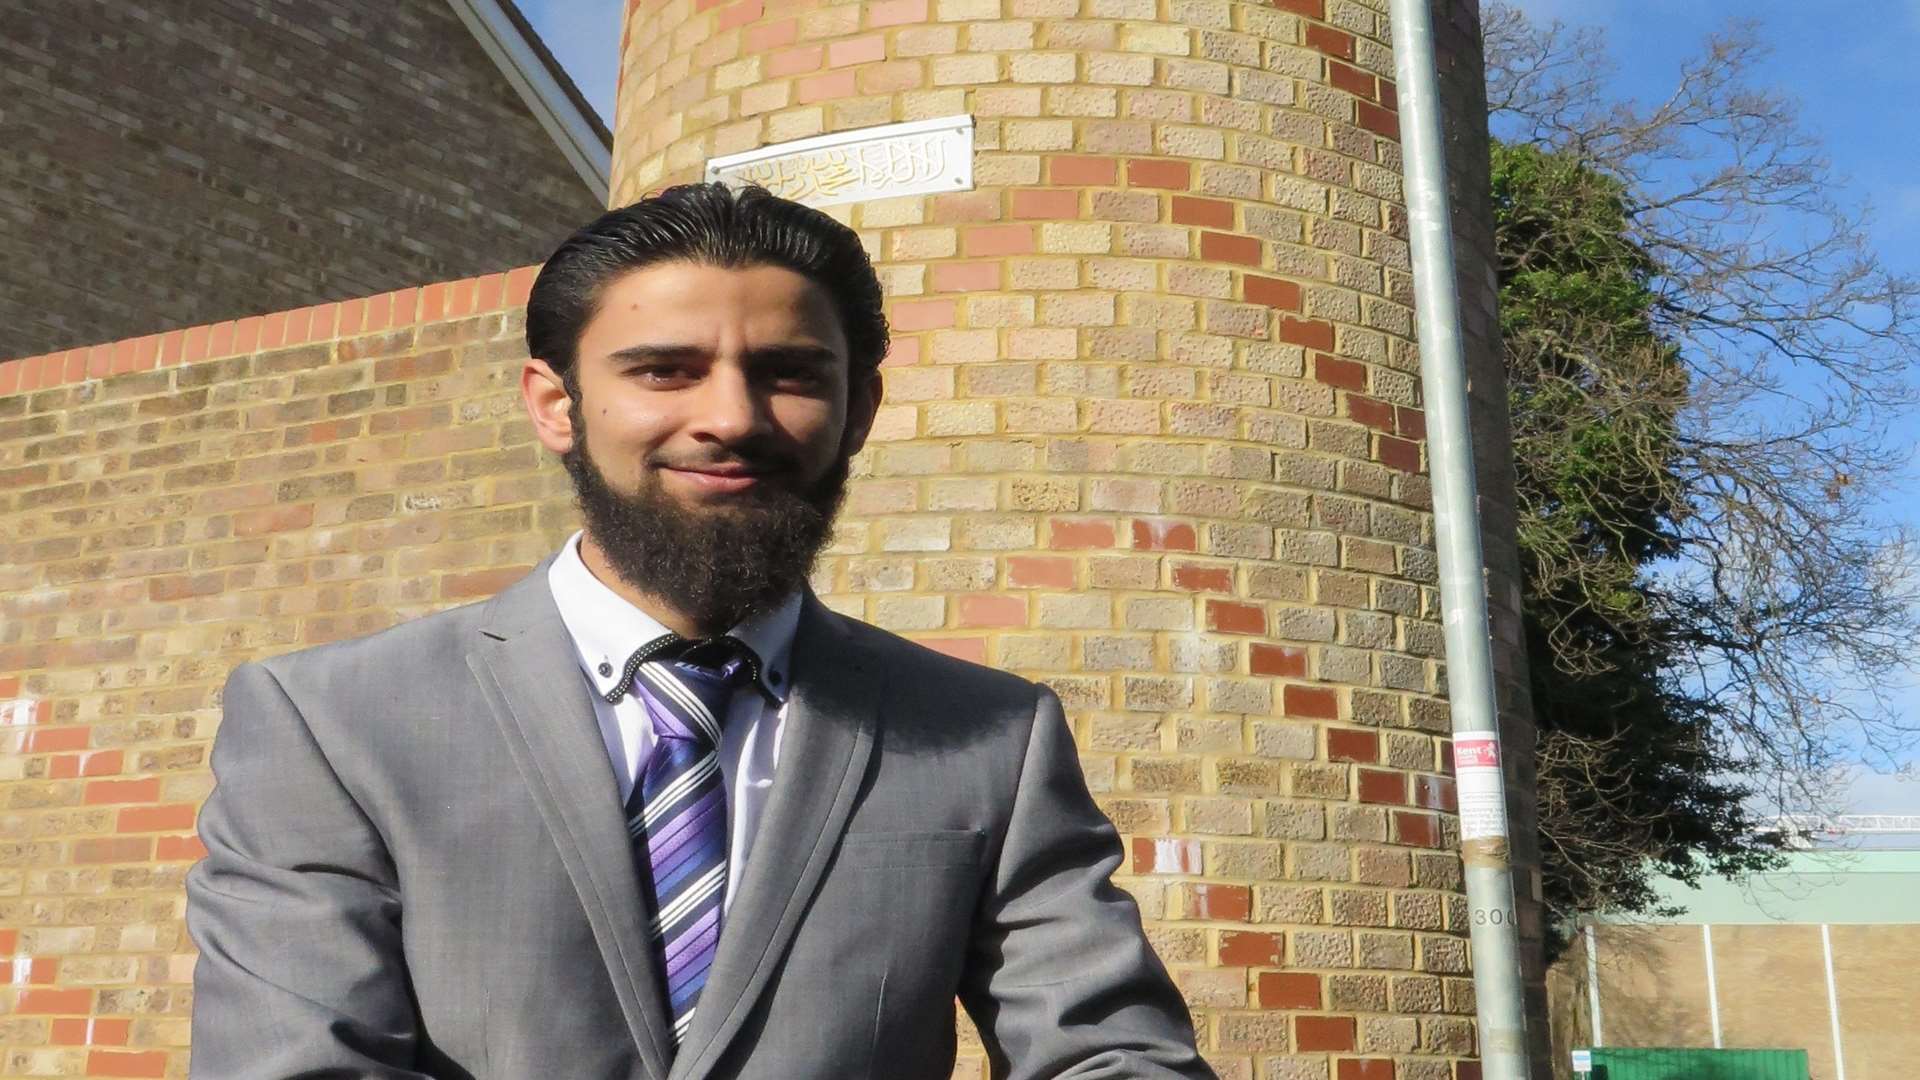 Ihsan Khan from the Canterbury Mosque